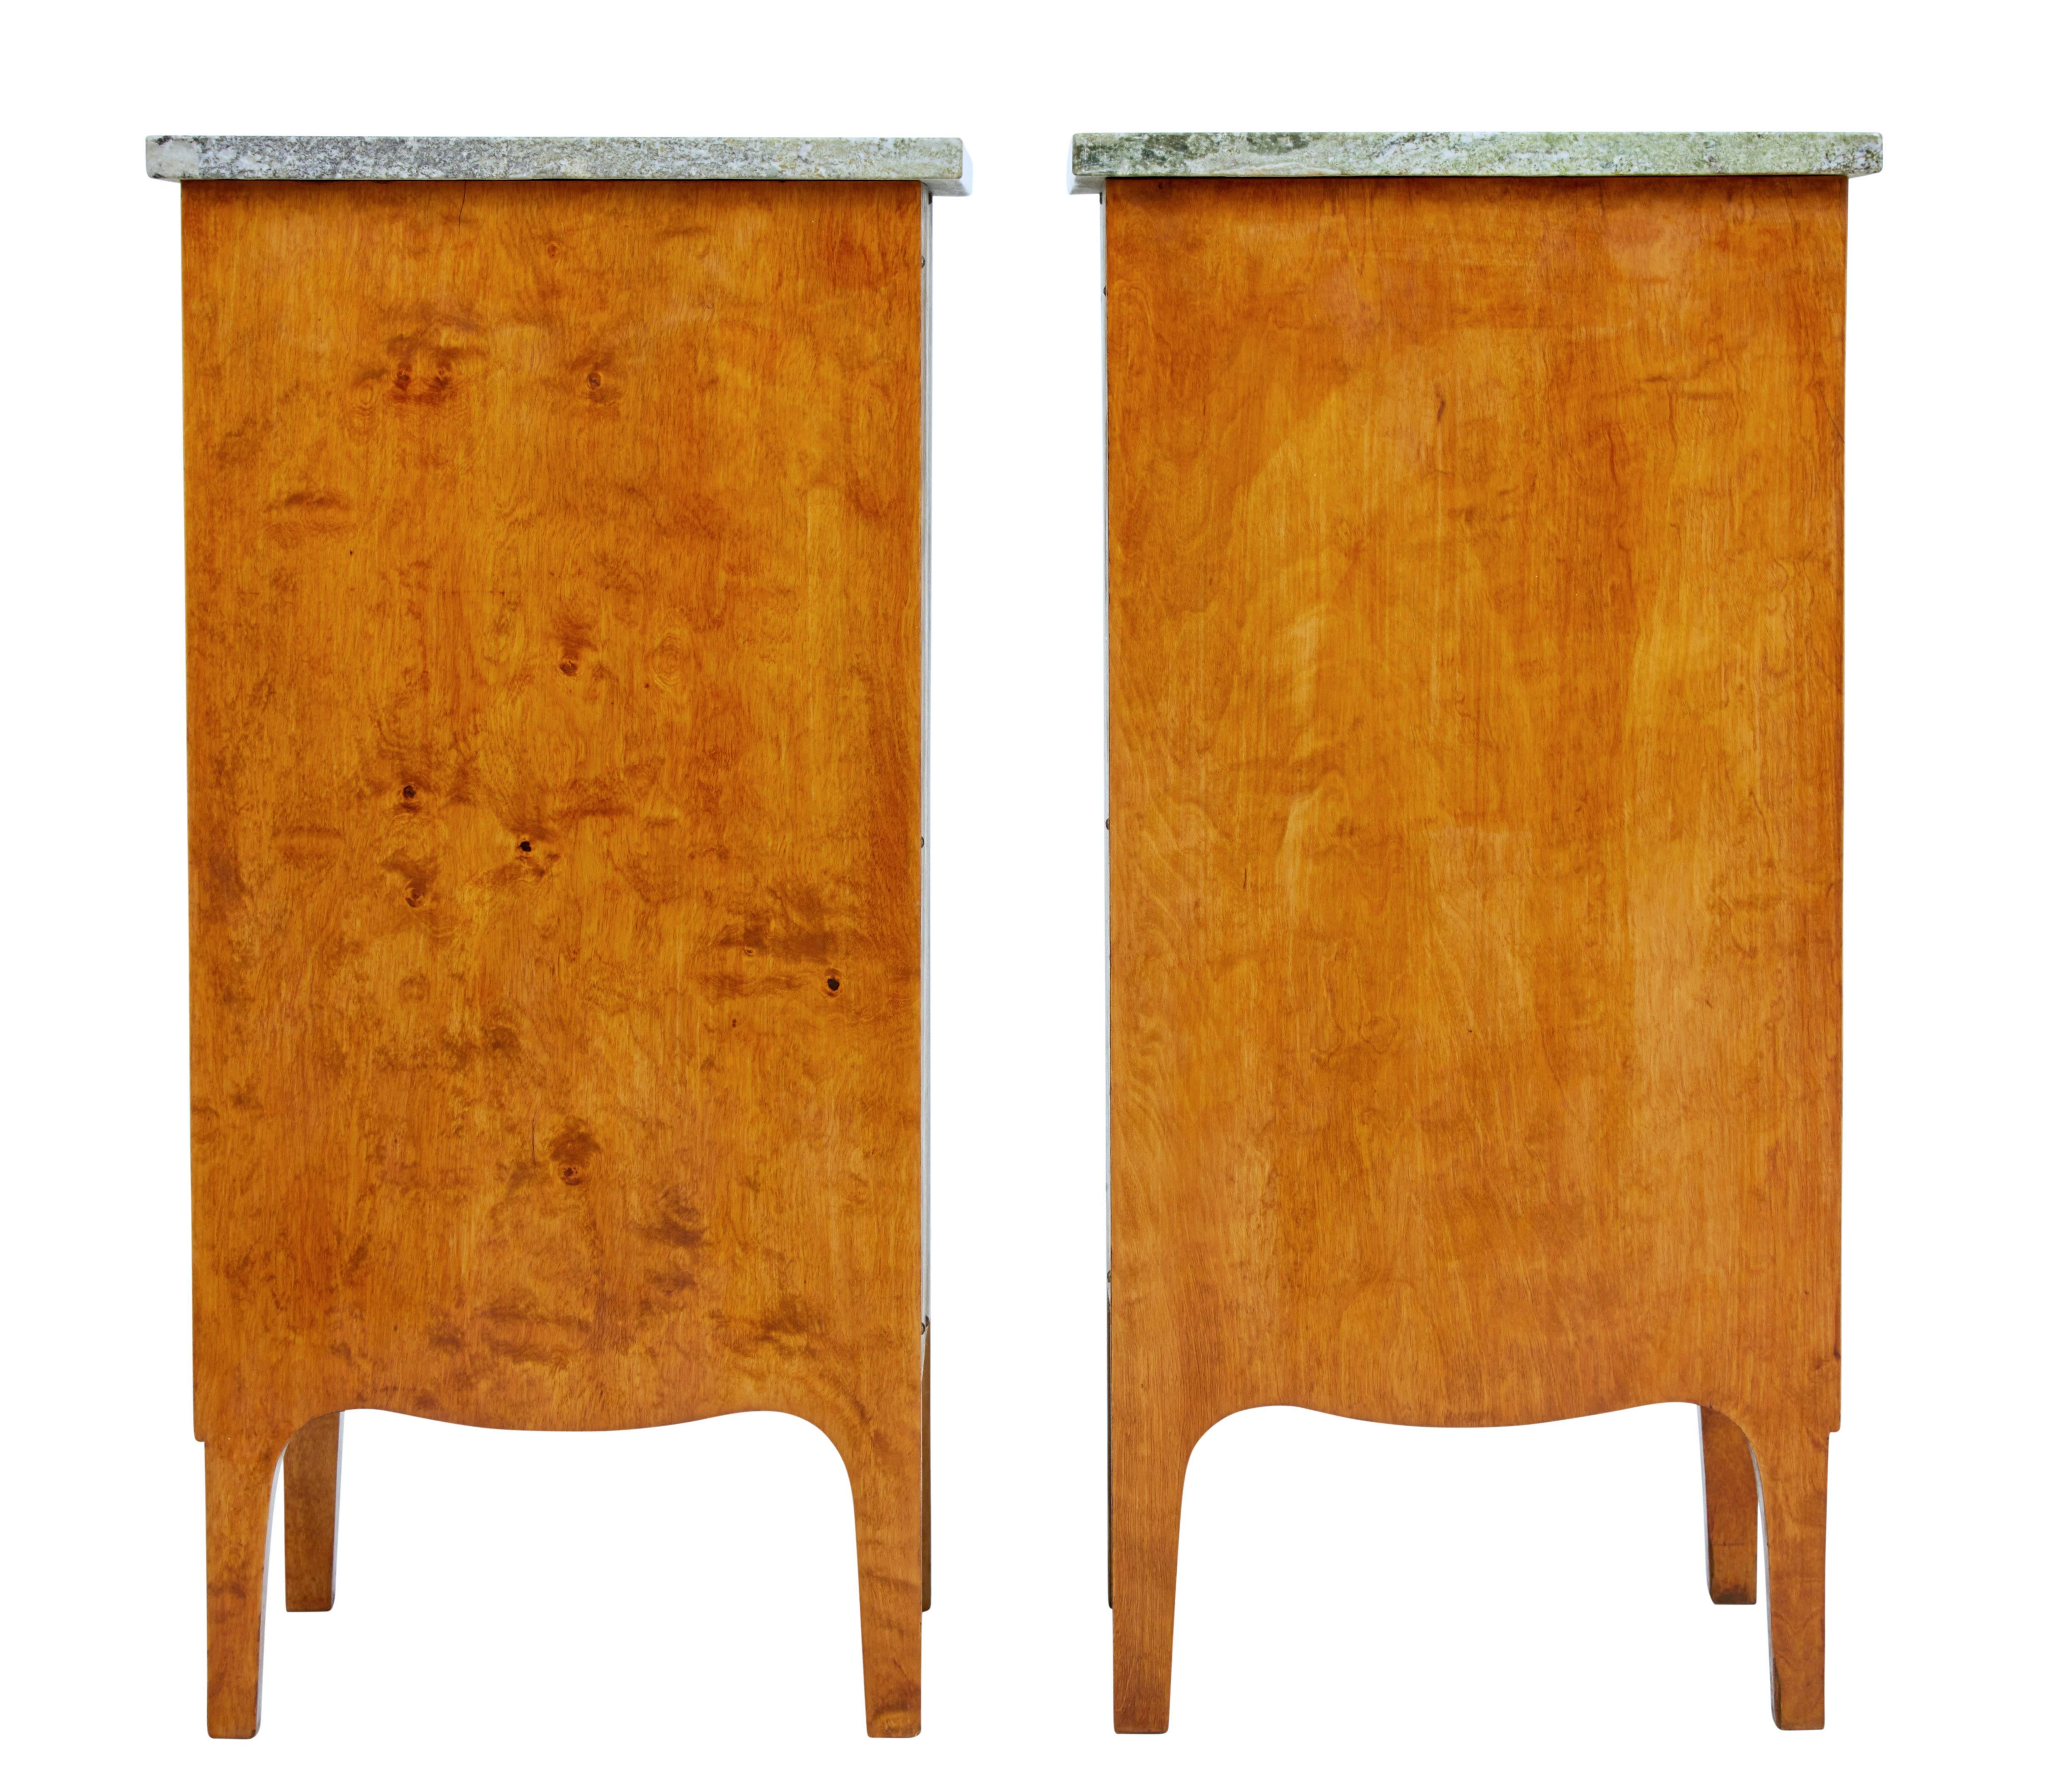 Swedish Pair of Early 20th Century Birch Art Nouveau Bedside Cupboards